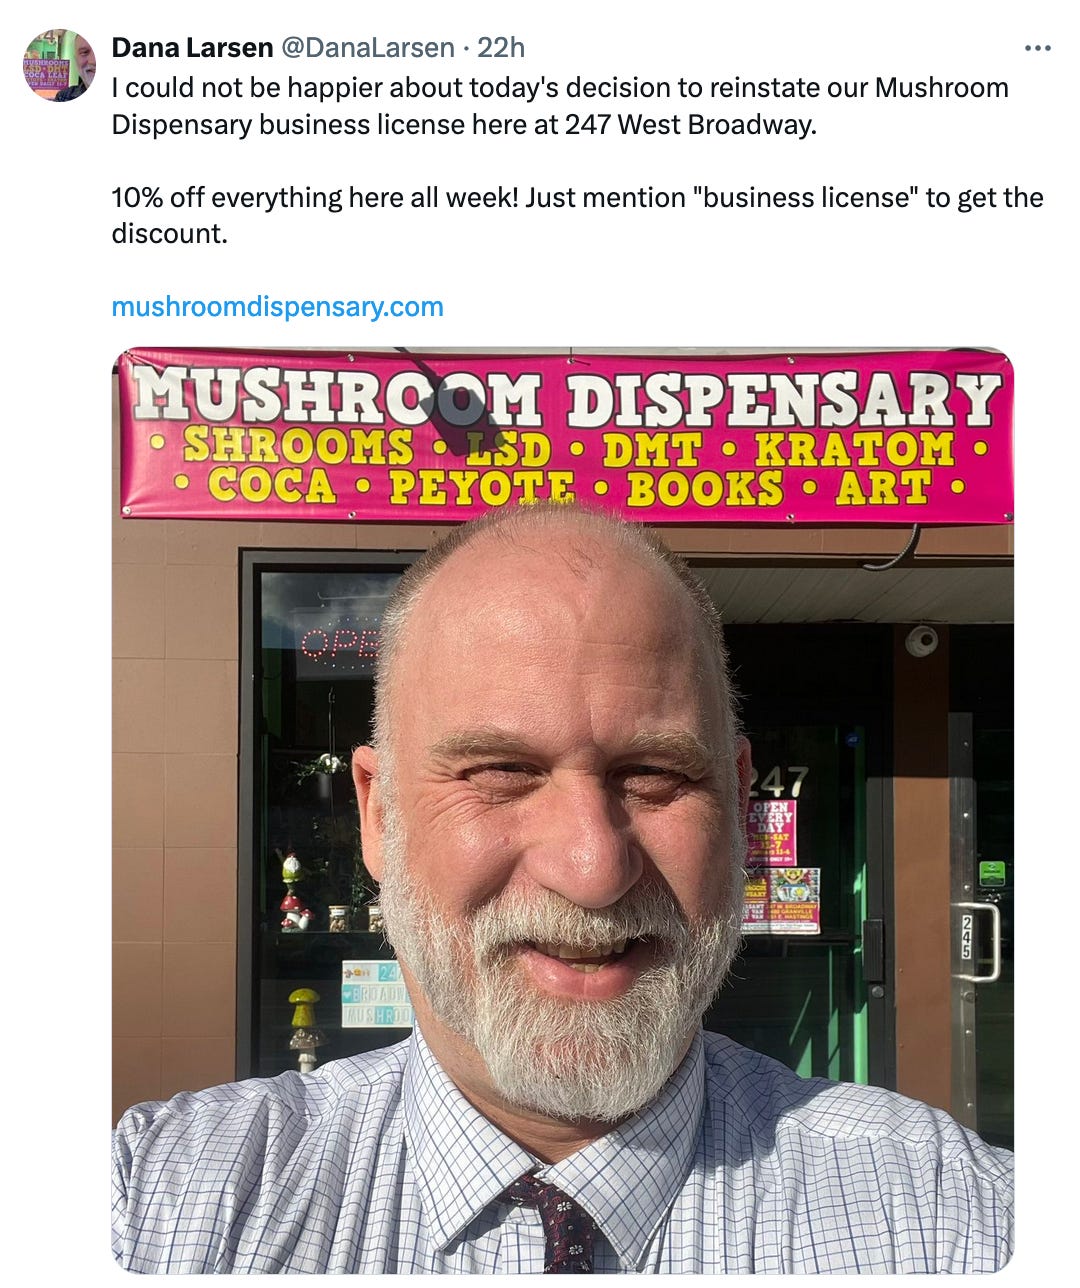 Post on X from @DanaLarsen that reads: "I could not be happier about today's decision to reinstate our Mushroom Dispensary business license here at 247 West Broadway.  10% off everything here all week! Just mention "business license" to get the discount." It also includes a photograph of Larsen, a smiling white man with a grey beard wearing a dress shirt and tie, standing in front of a store sign that reads: Mushroom Dispensary - Shrooms, LSD, DMT, Kratom, Coca, Peyote, books, art.